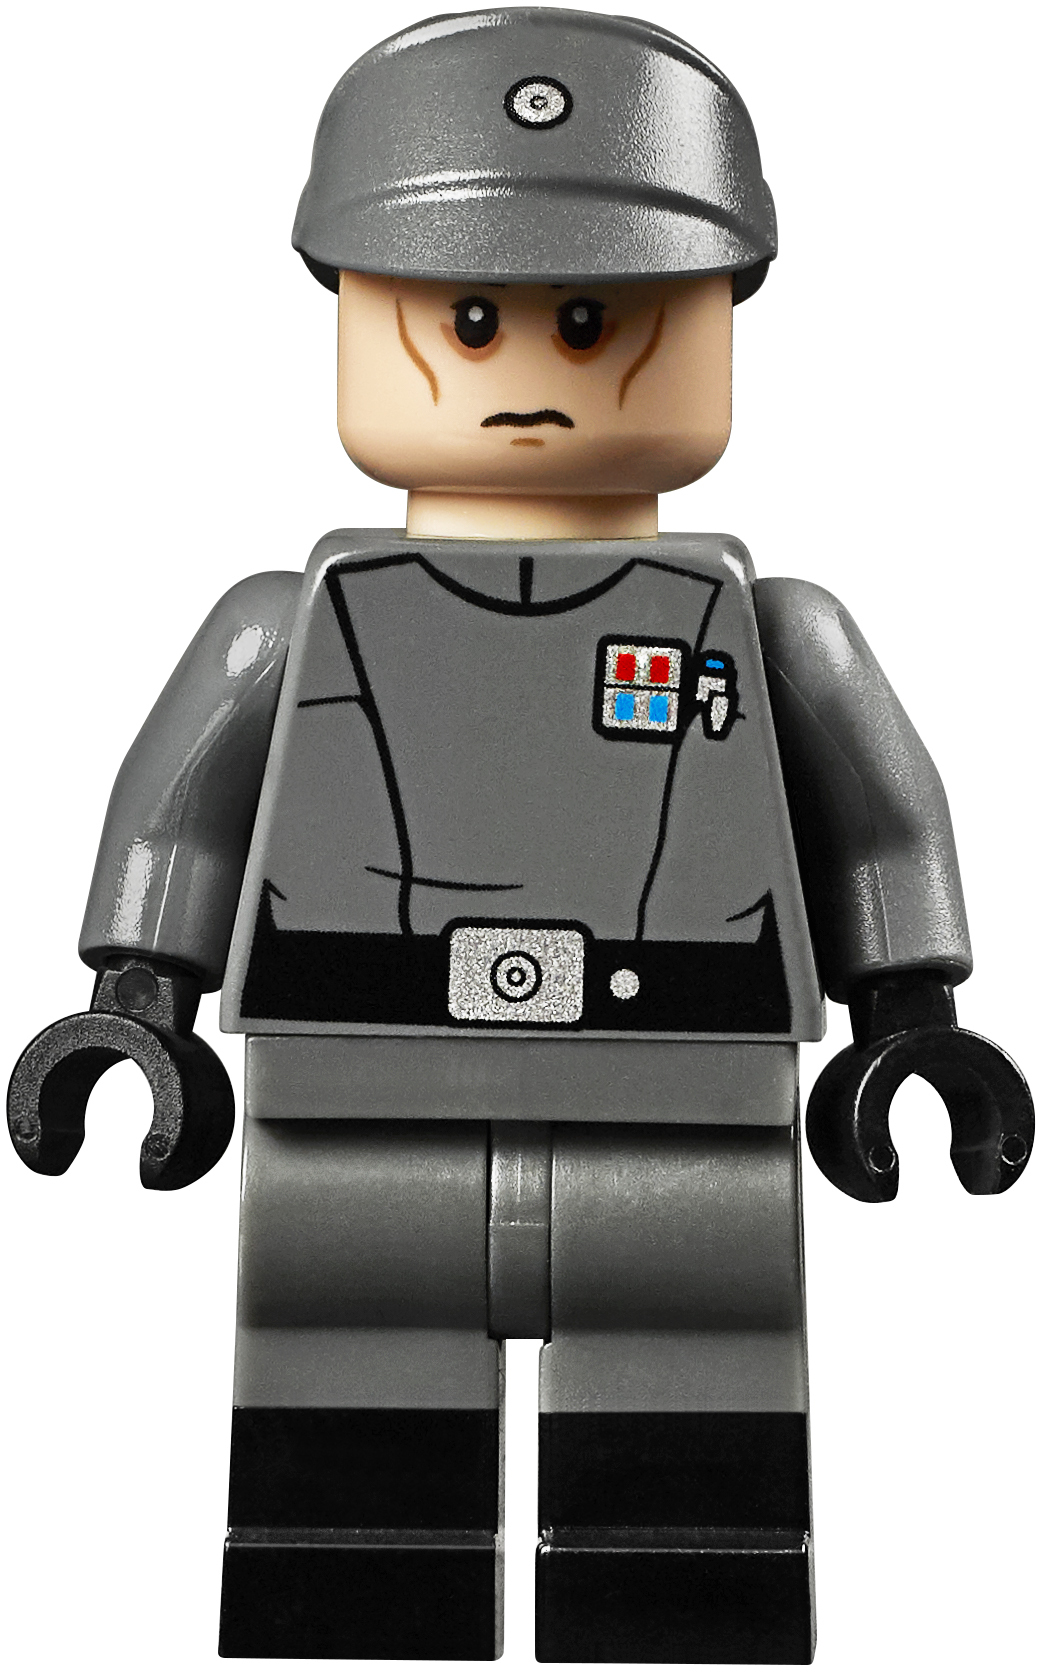 LEGO STAR WARS NEW 6211 BESTPRICE GIFT 2006 IMPERIAL CAPTAIN OFFICER 